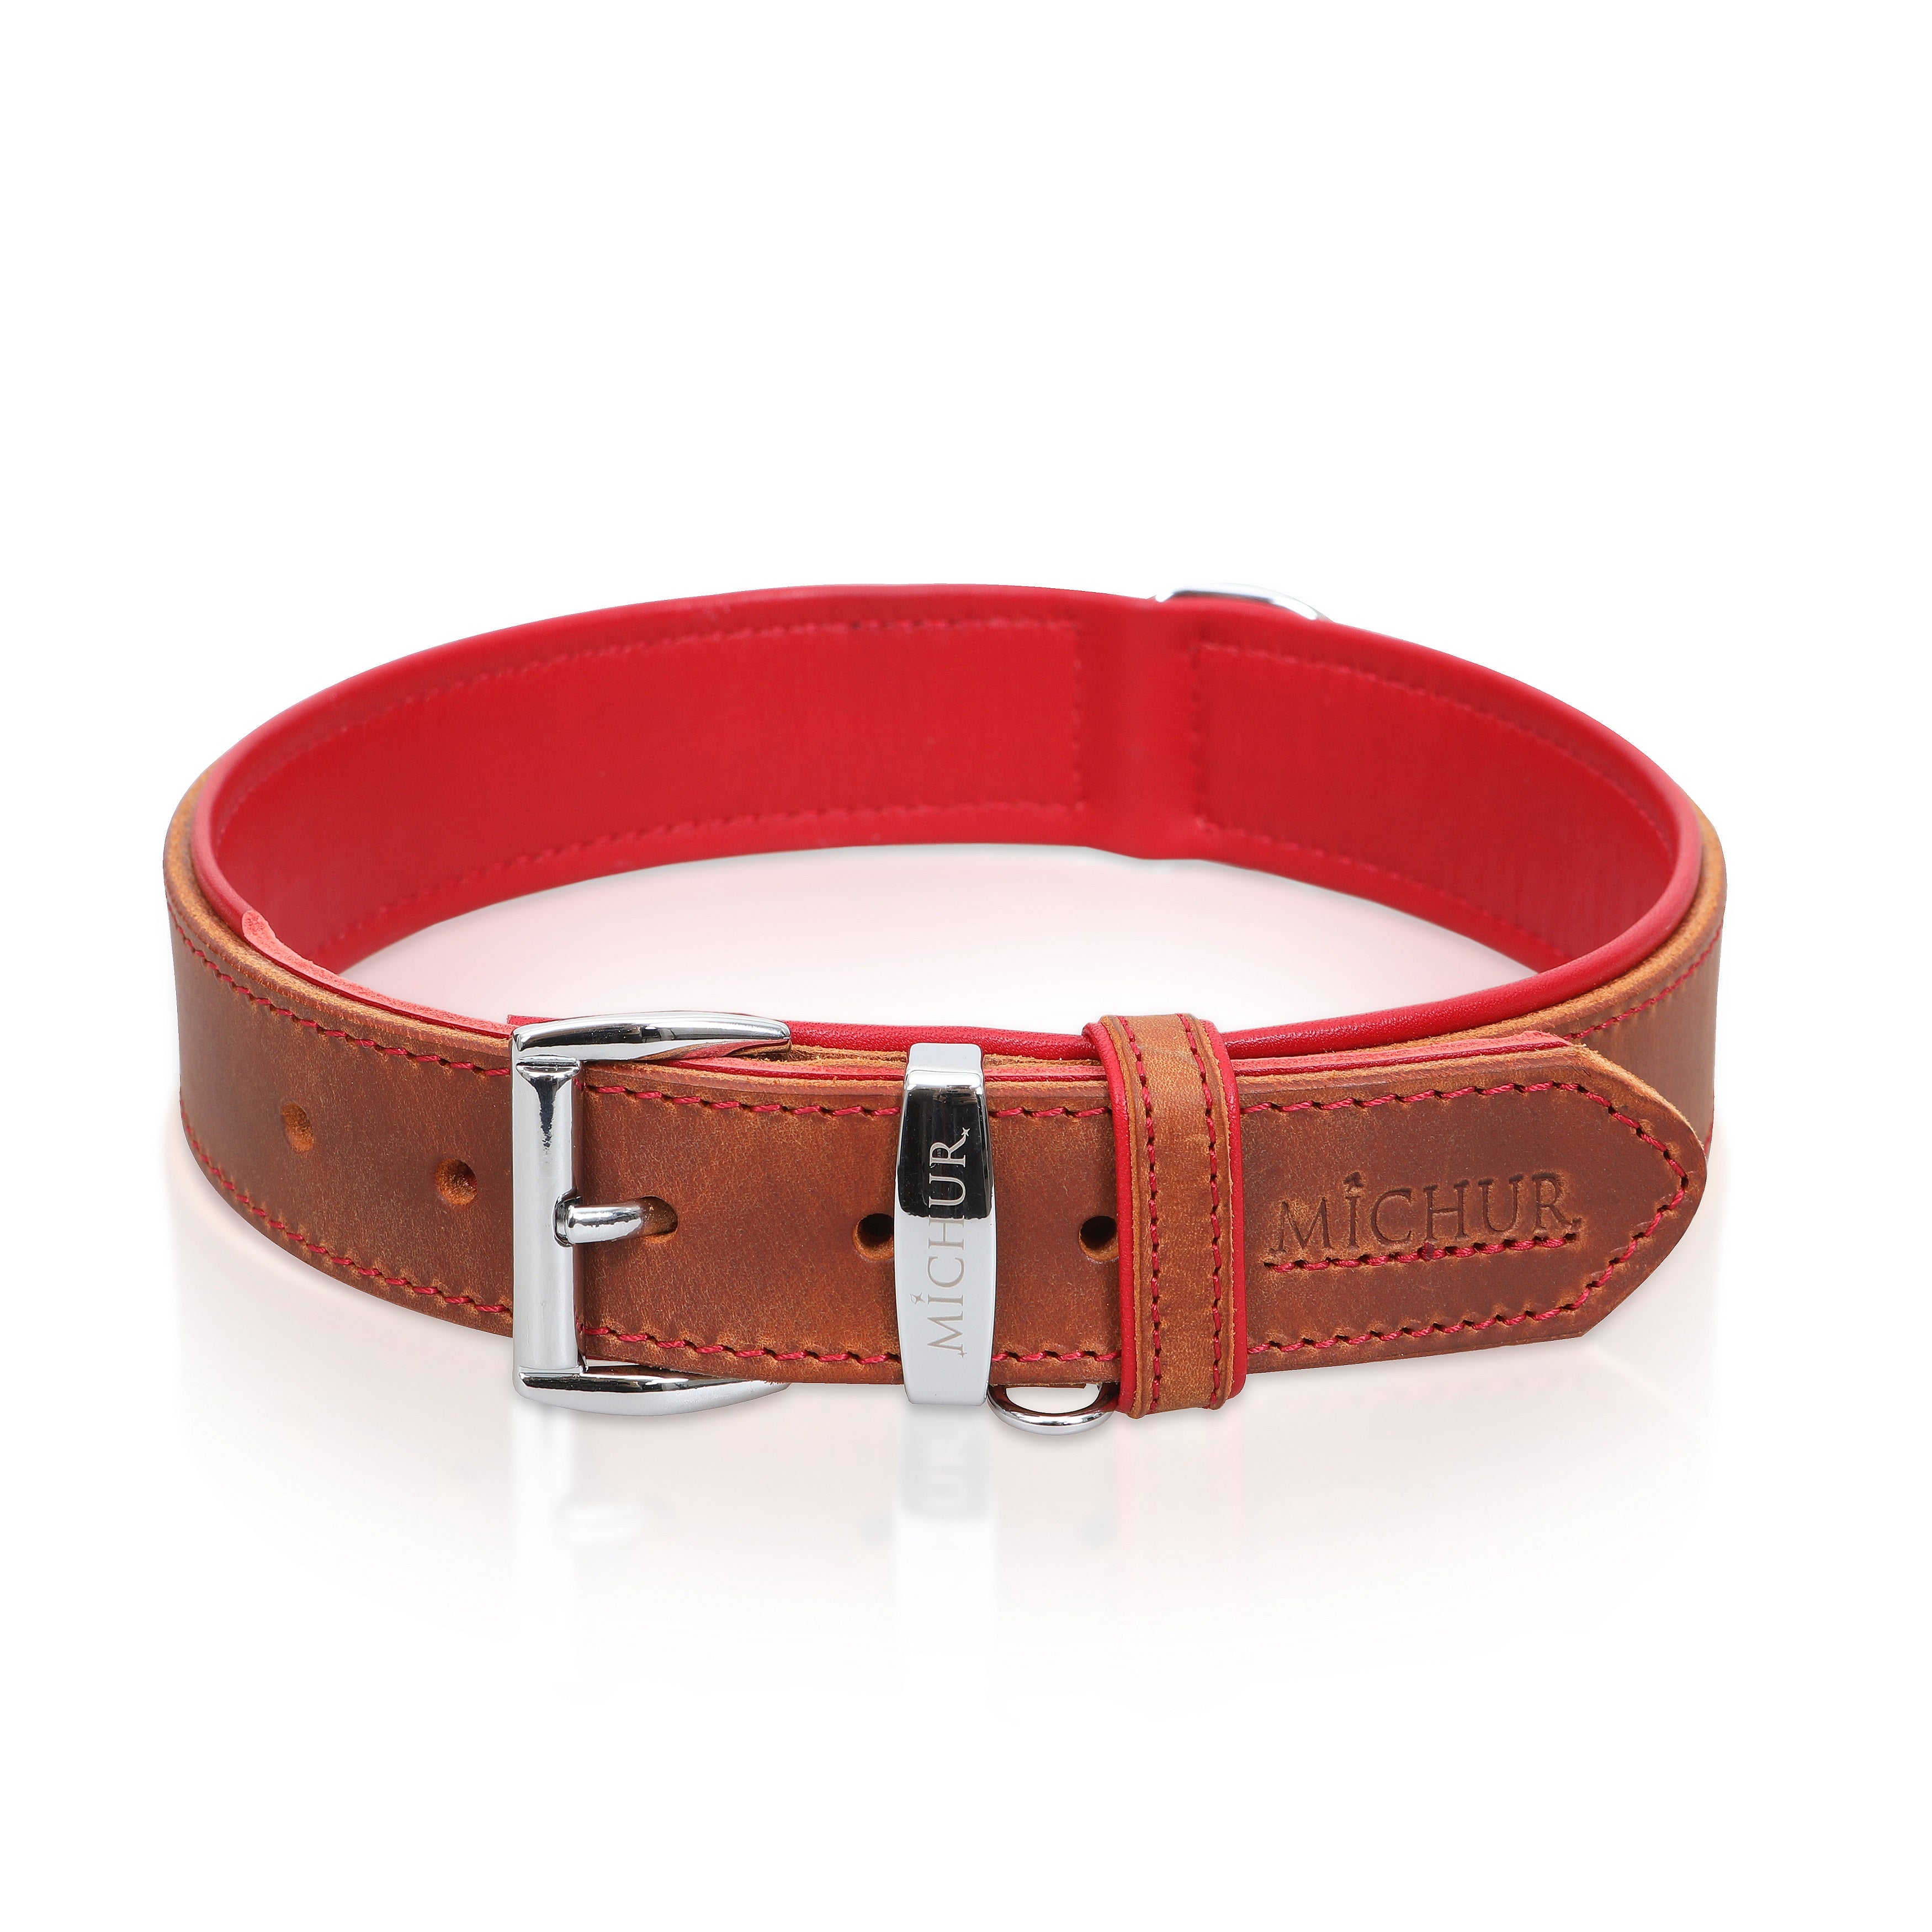 Charlie collar red 